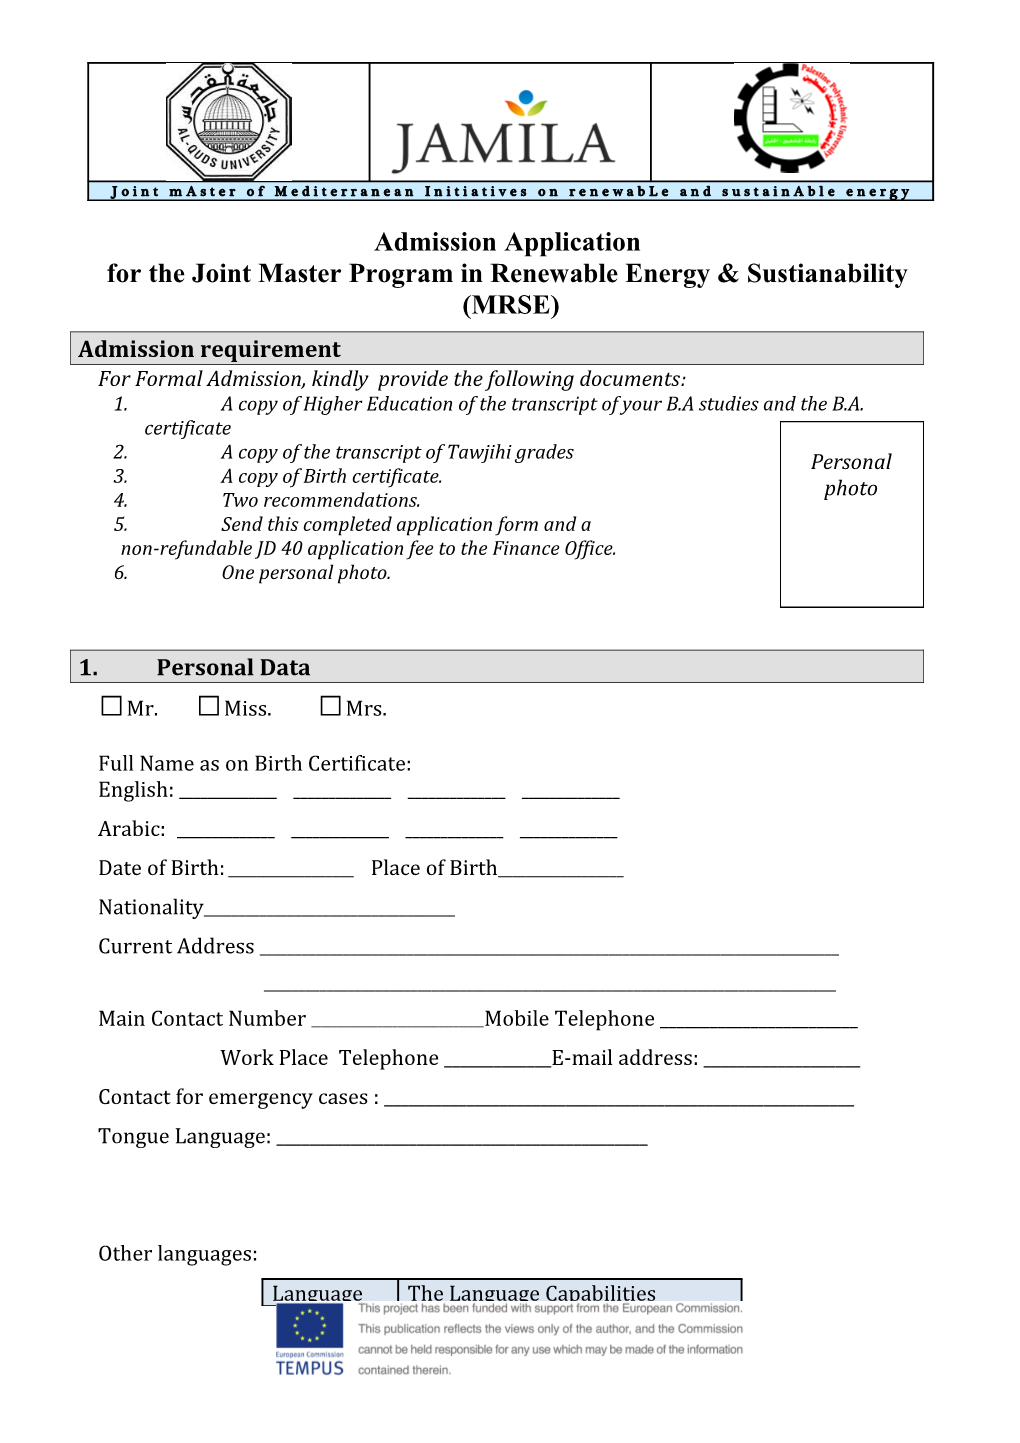 For the Joint Master Program in Renewable Energy & Sustianability